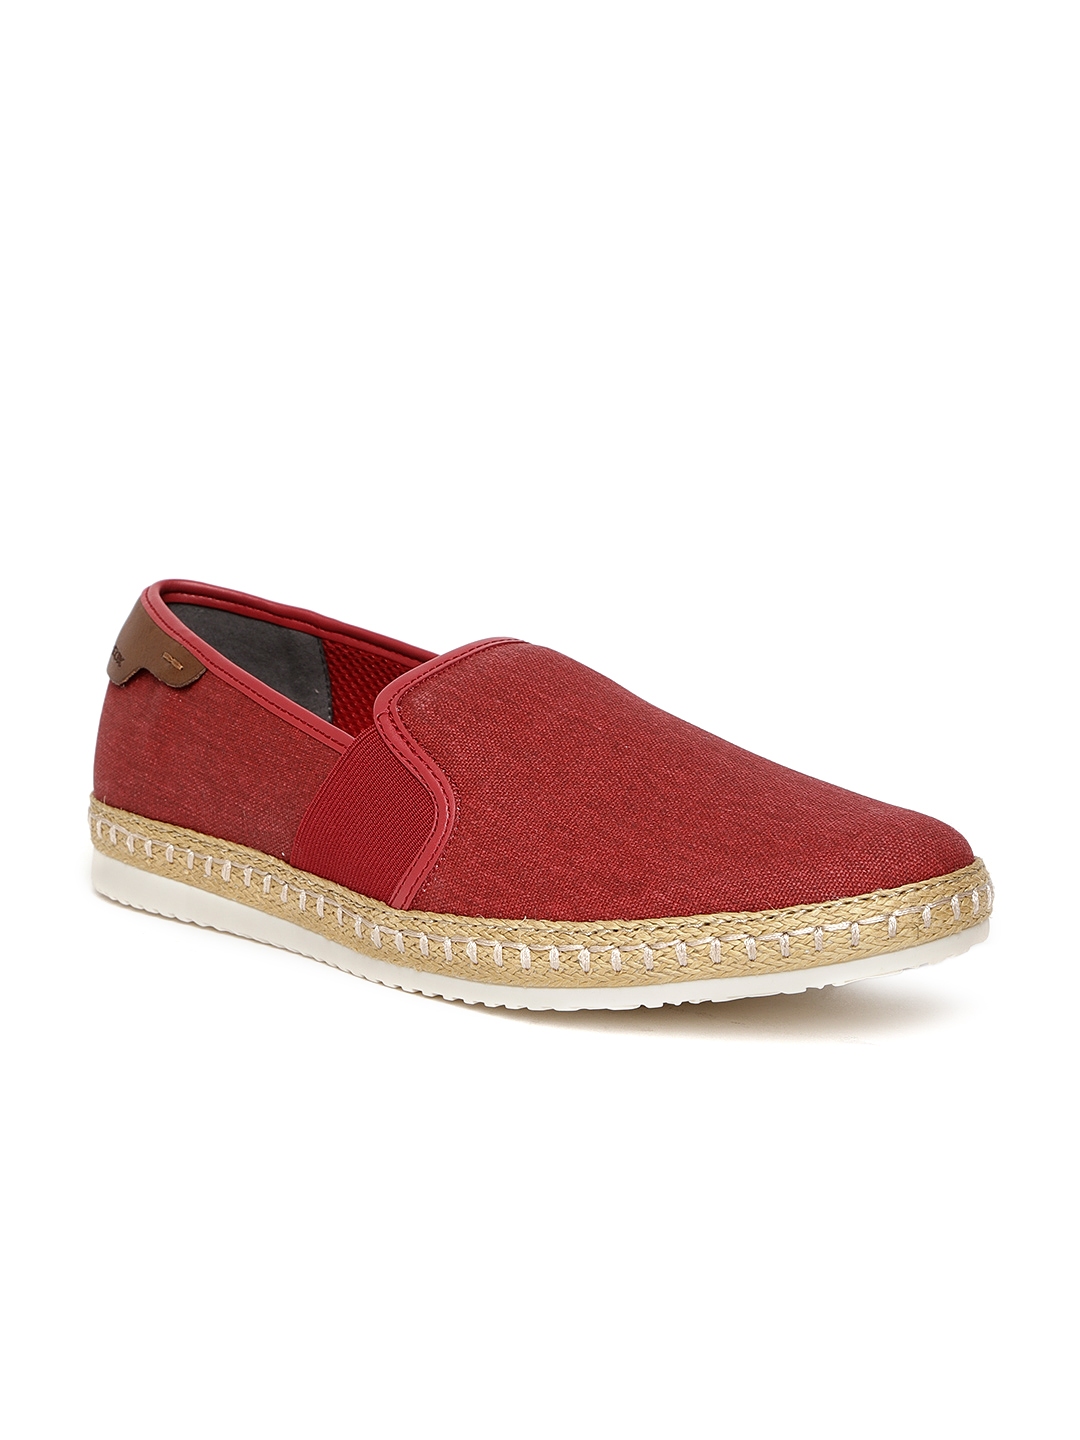 Buy Geox Men Red Espadrilles - Casual Shoes for Men 7520752 | Myntra